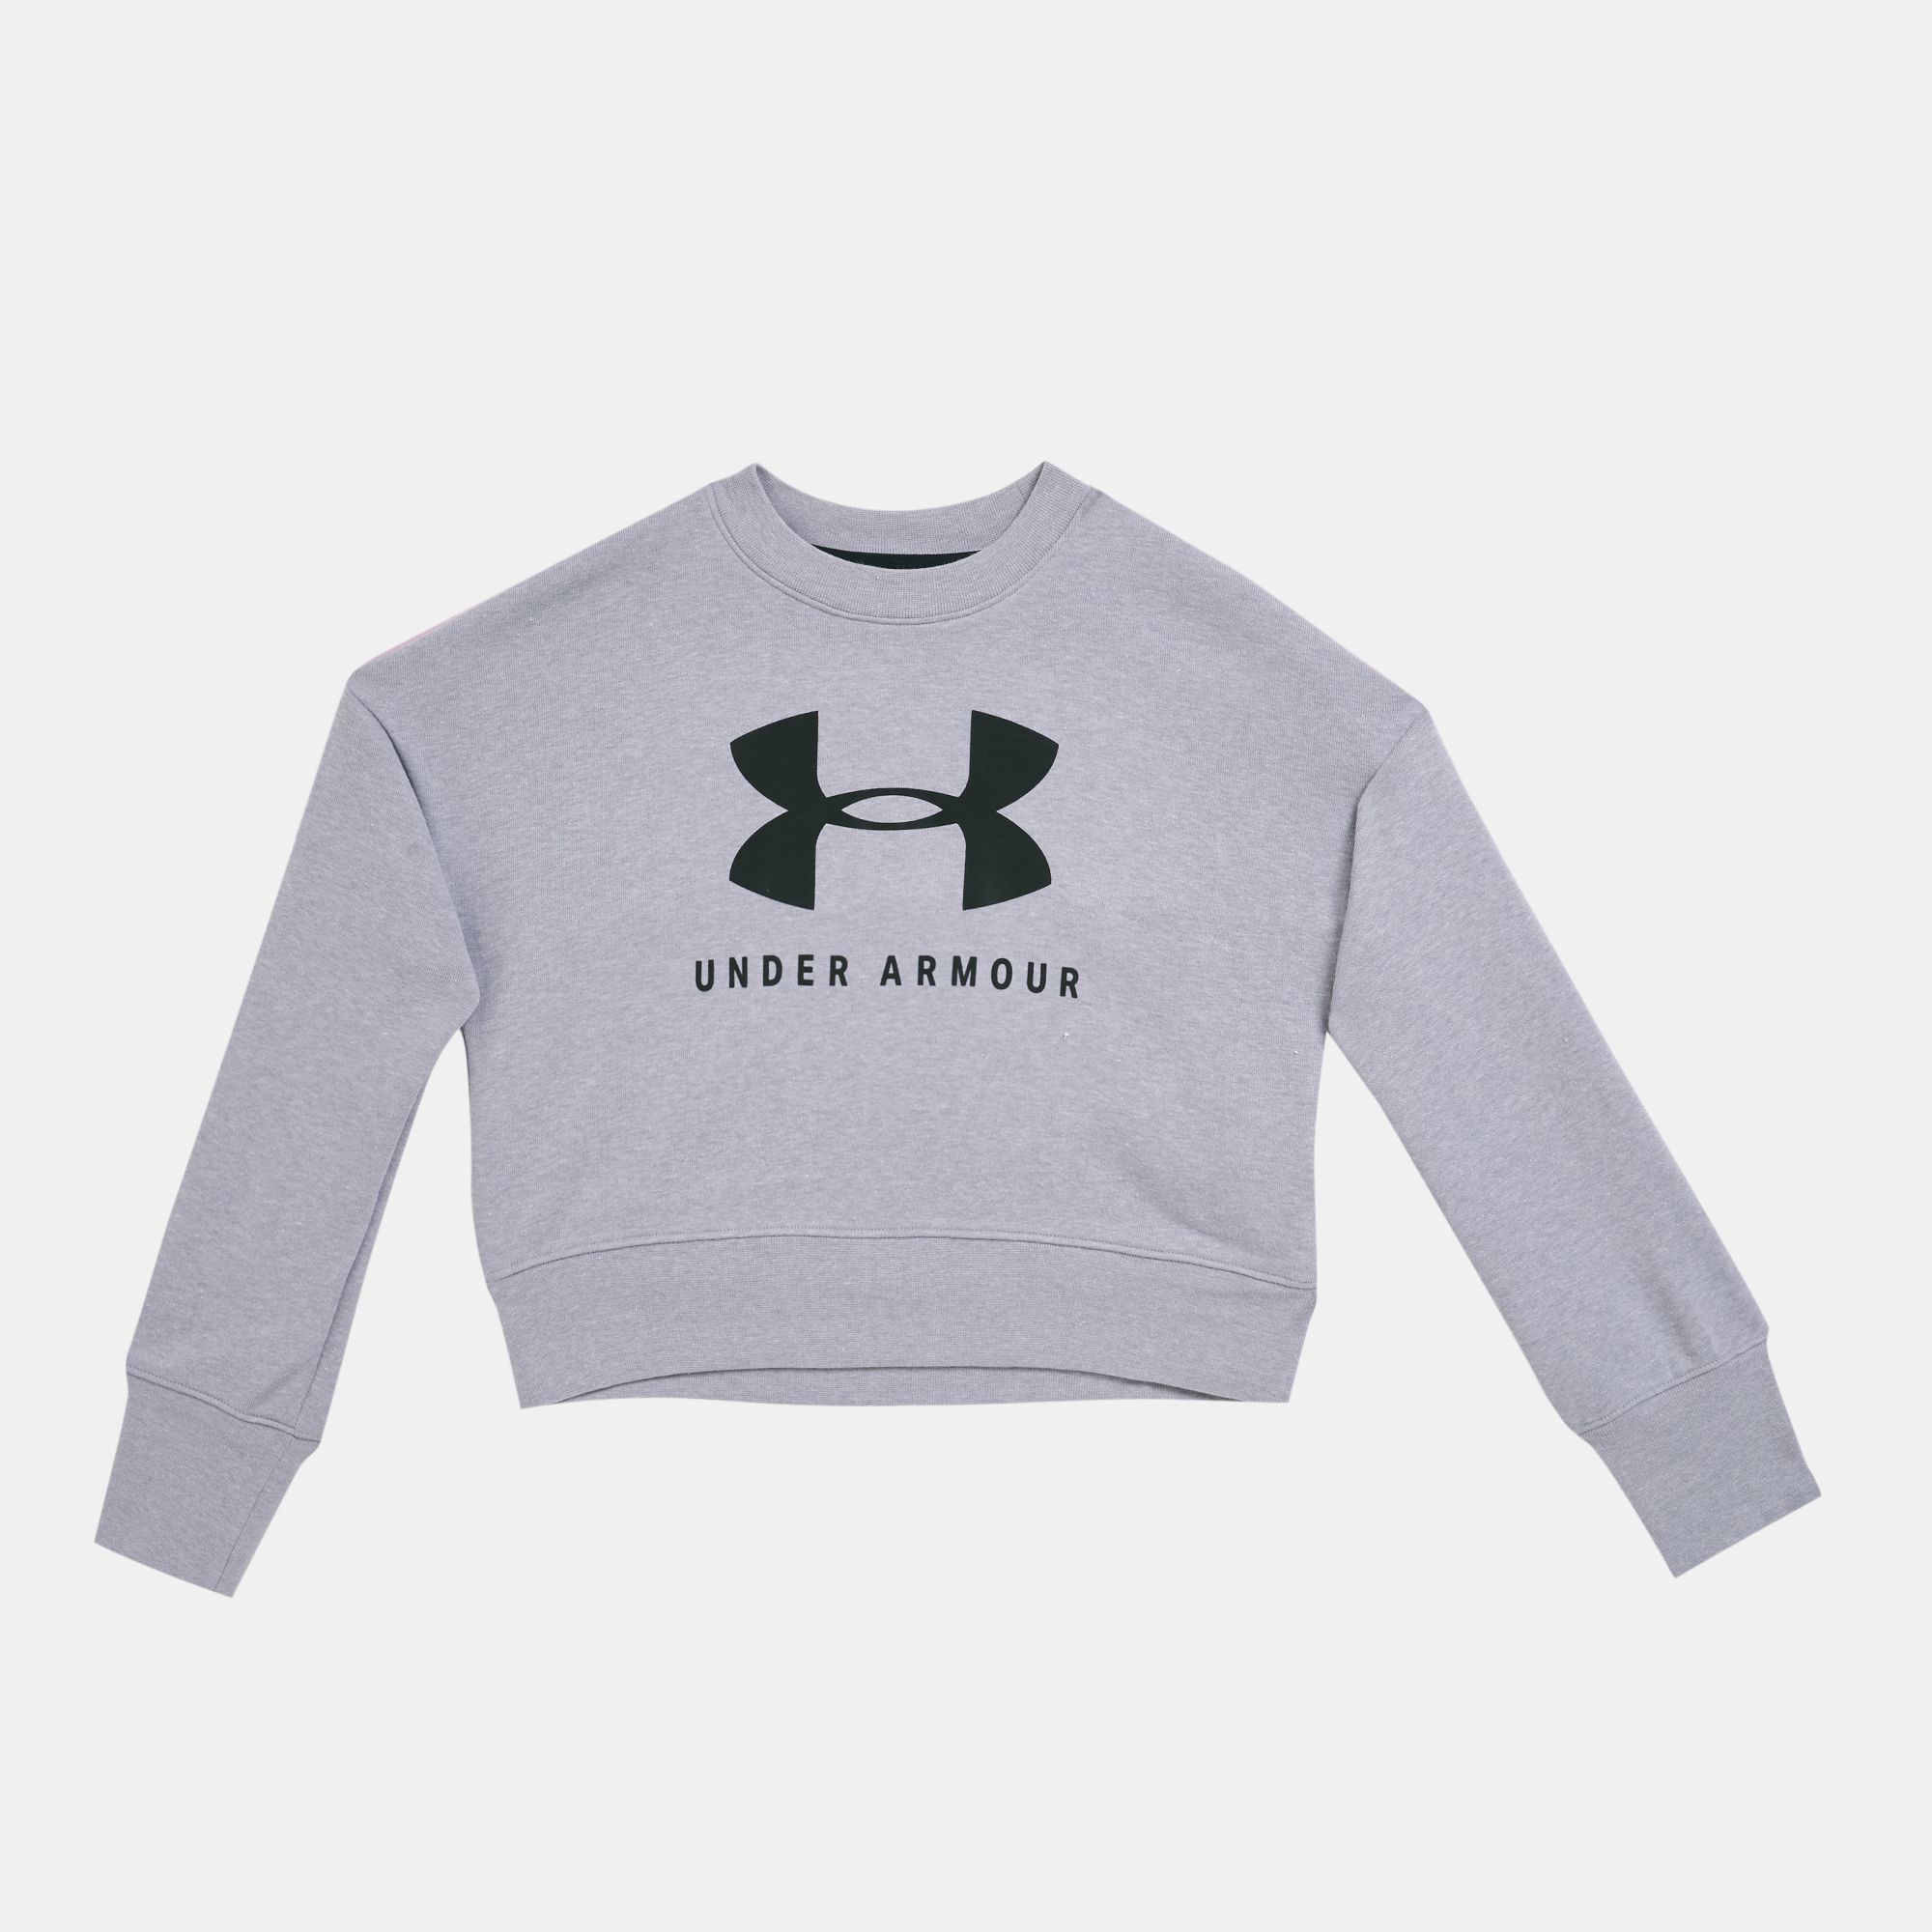 Under Armour Youth Size Chart Uk